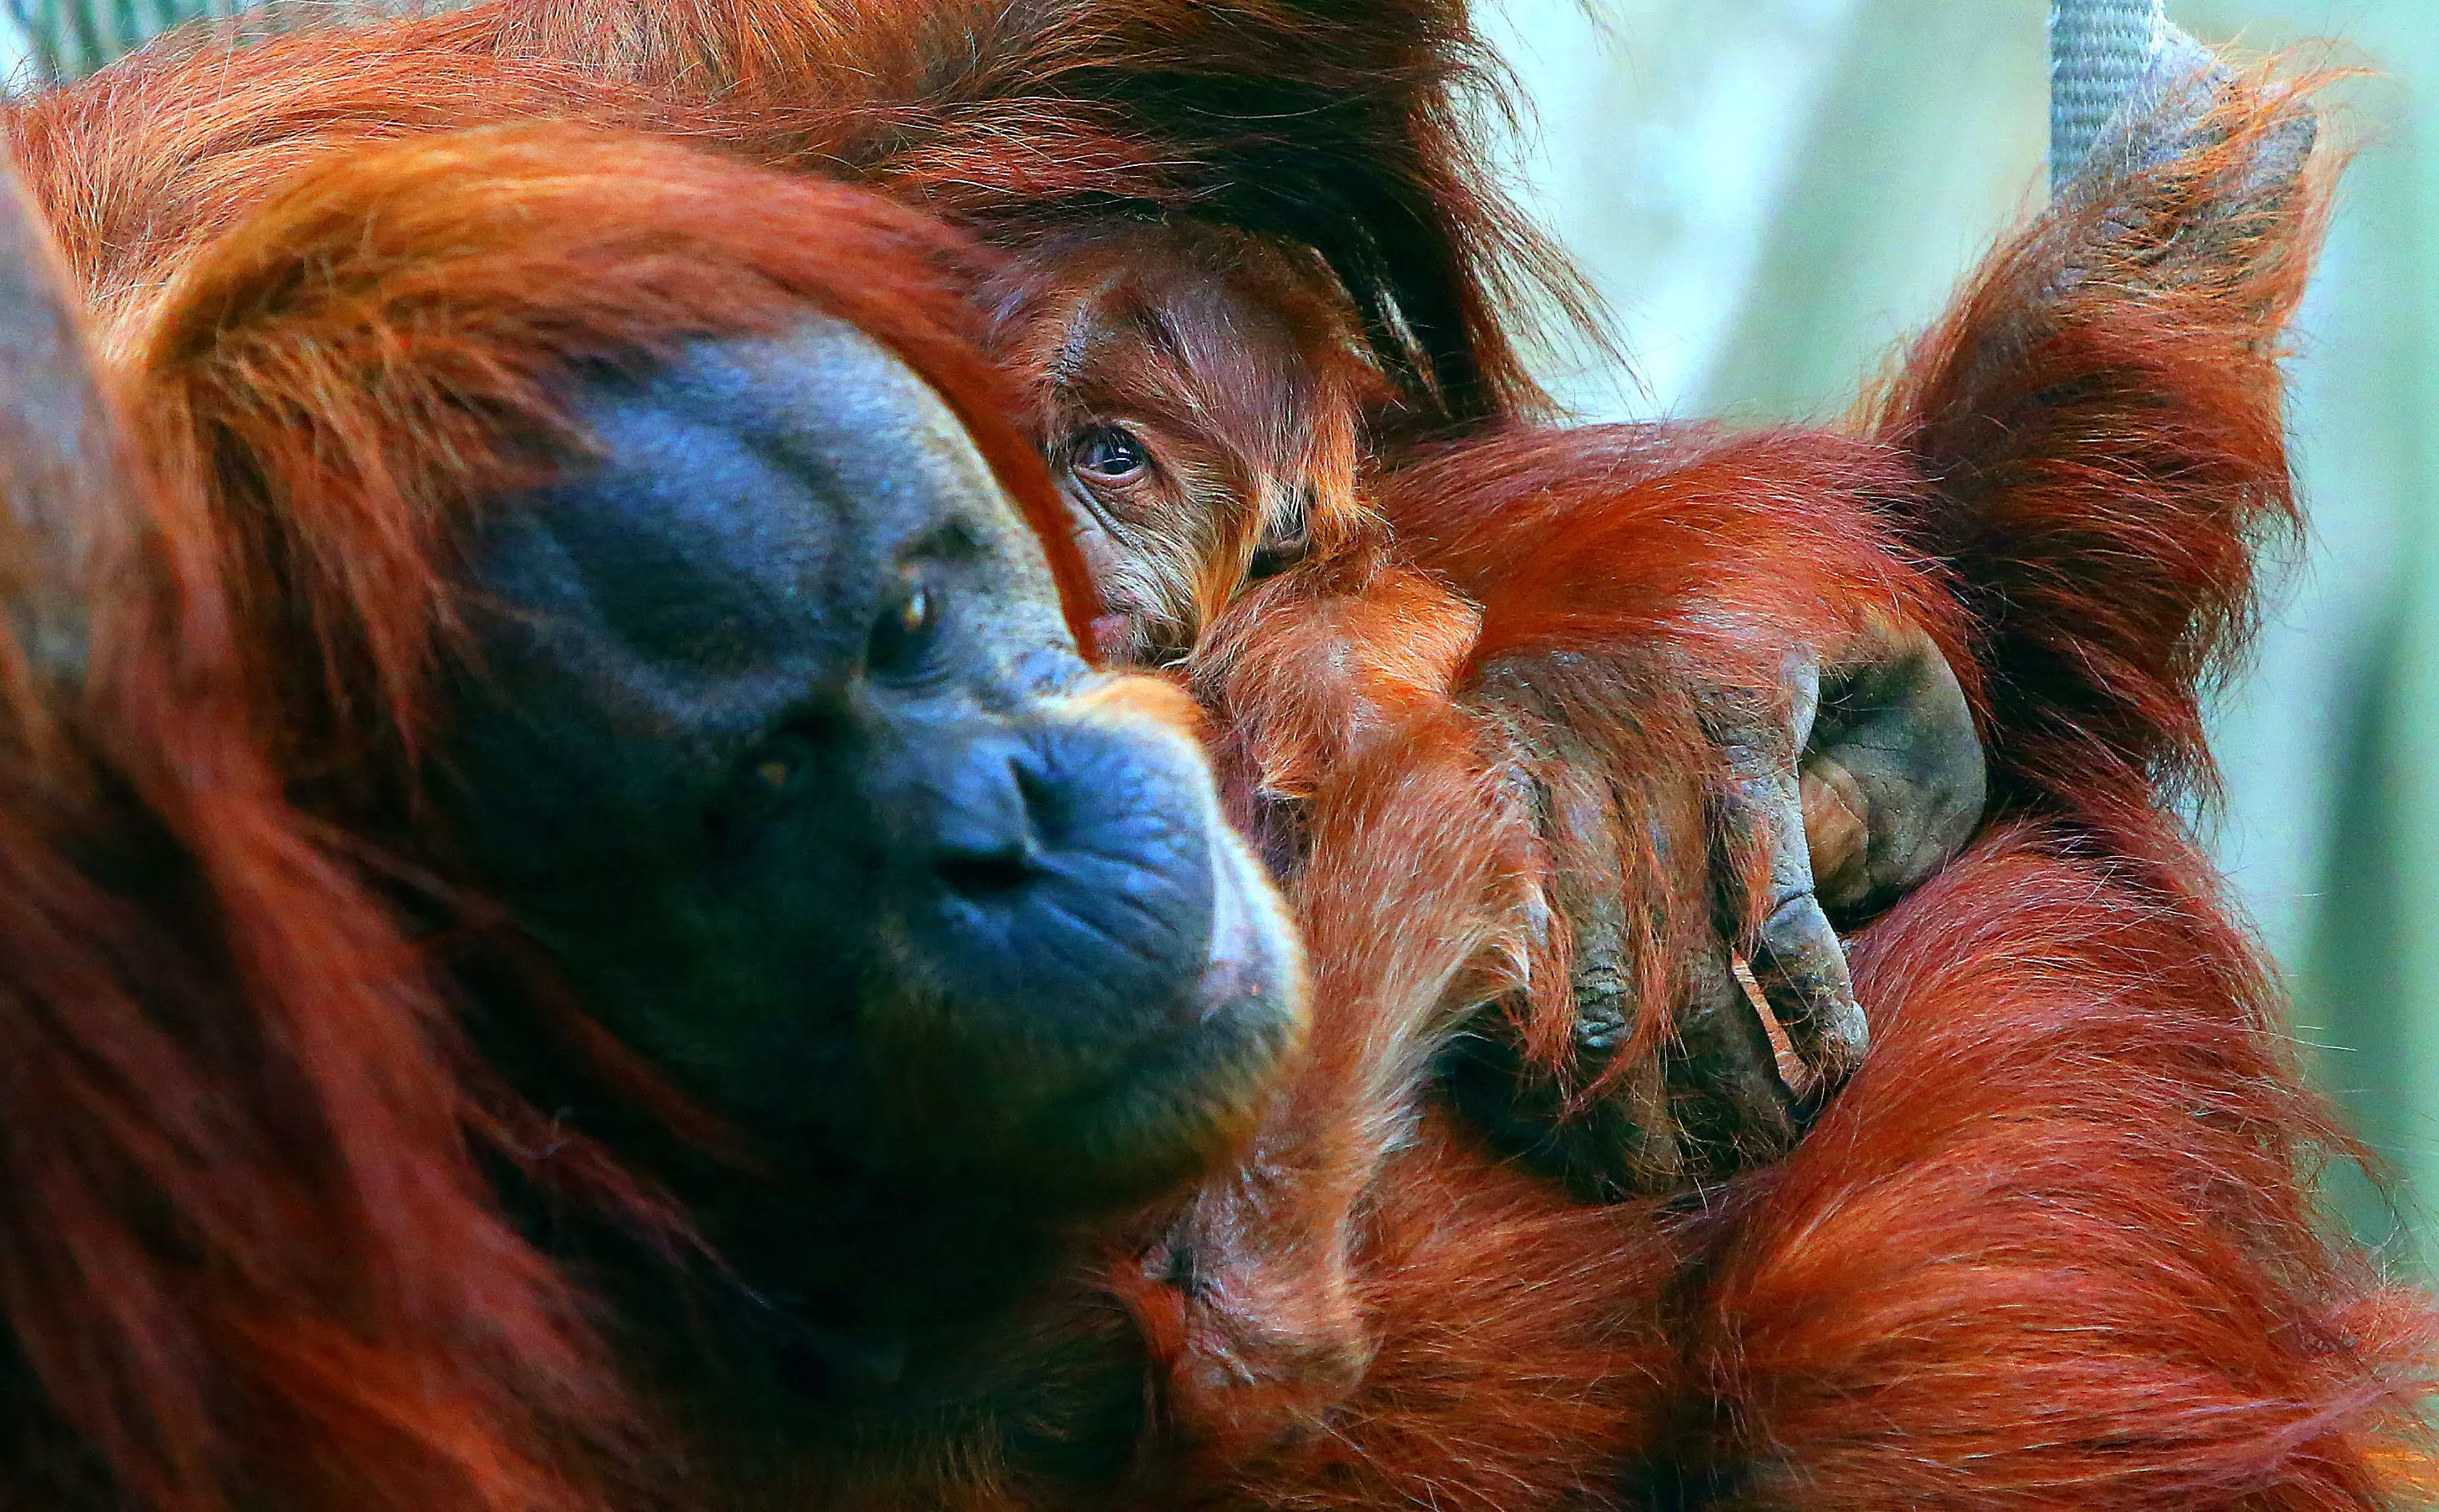 Endangered orangutans and other mammals were saved by keepers.